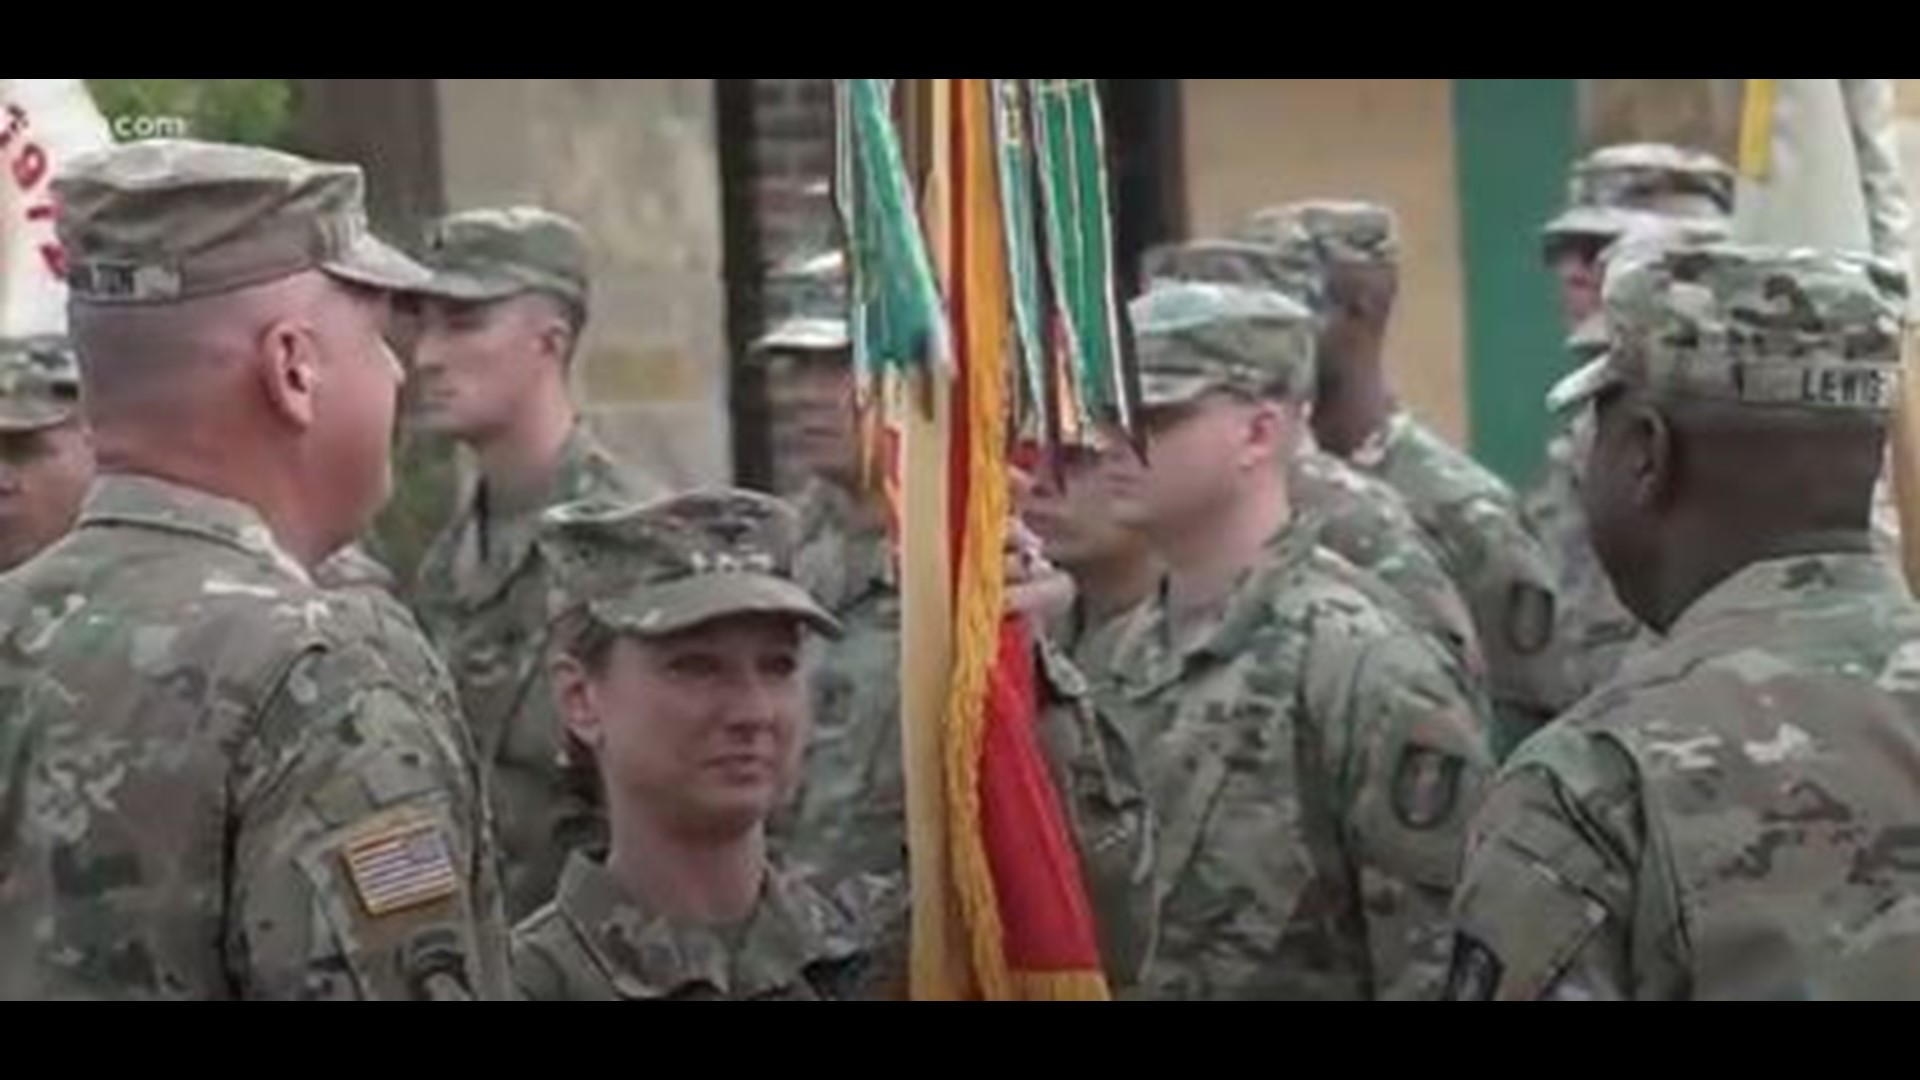 The Texas Army National Guard Brigade has a new commander. The latest leader was honored at a Change of Command Ceremony in Temple on Aug. 3, 2019